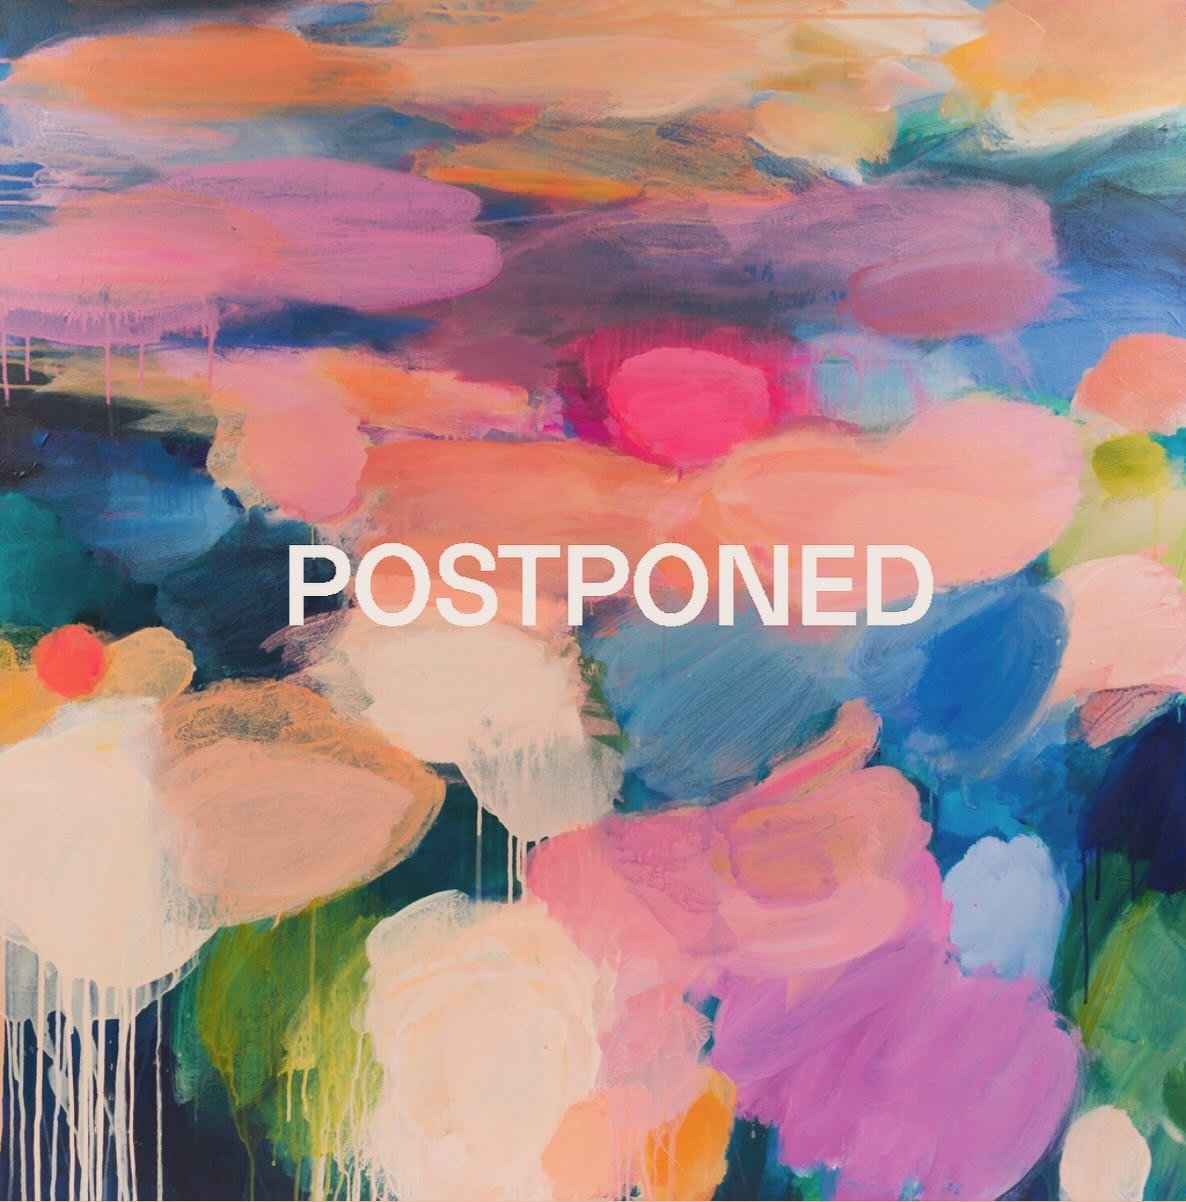 🌸POSTPONED 🌸
&bull;
I hate to say this but&mdash;my Print Discount weekend has to be postponed until next month due to technical issues!!
&bull;
&bull;
I&rsquo;ve been having major computer issues which started at the beginning of March ! Hopefully